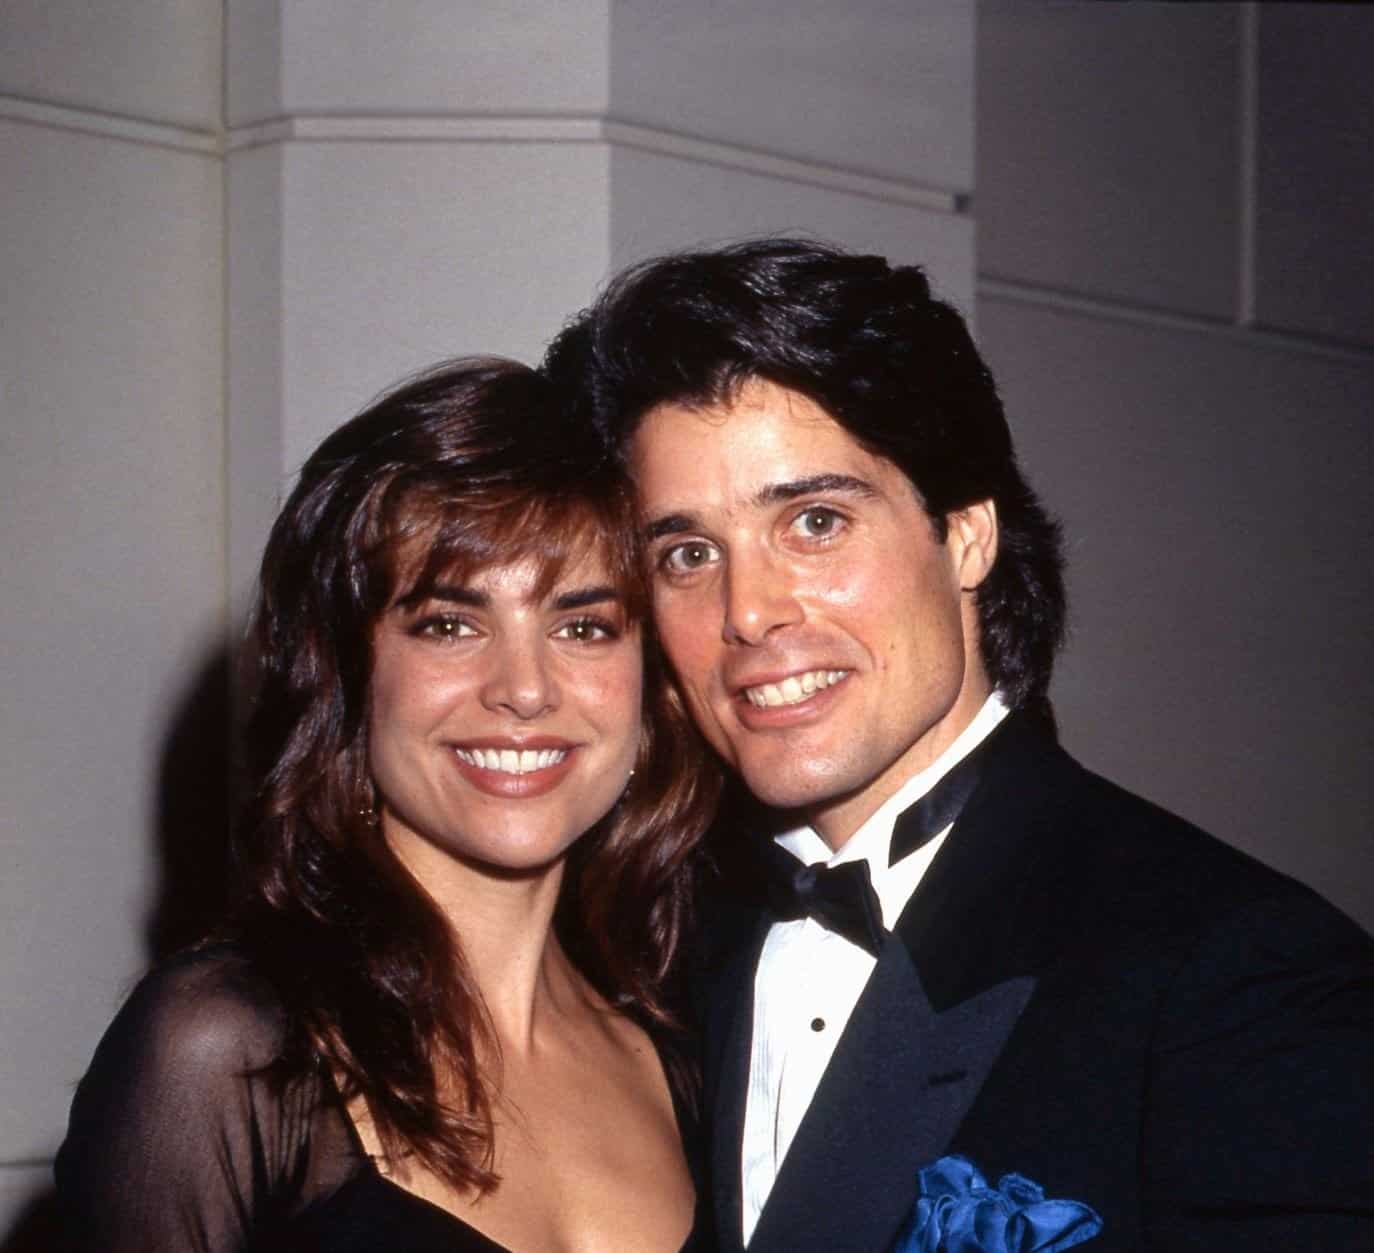 Image of Peter Barton with his former partner, Lisa Rinna